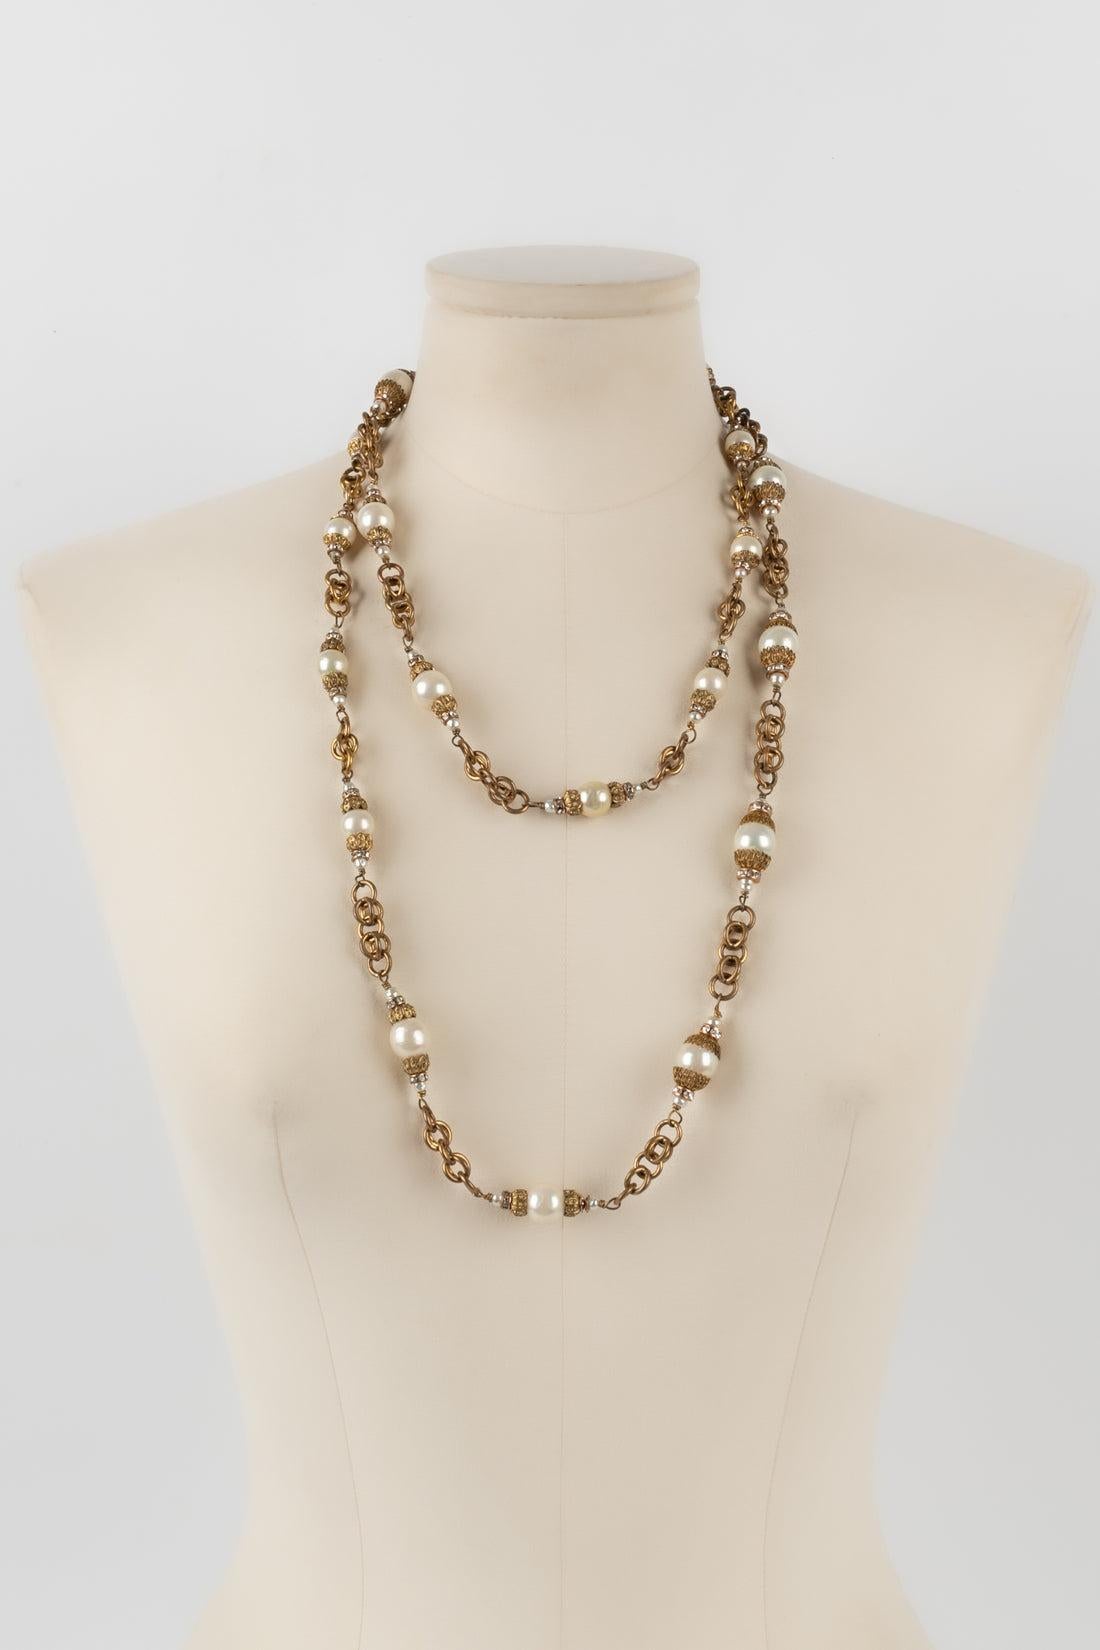 Chanel - (Made in France) Golden metal necklace / sautoir with an old gold color, and with costume pearls. Antique jewelry from the Coco era, i.e. from the 1950s-1960s.

Additional information:
Condition: Good condition
Dimensions: Length: 138